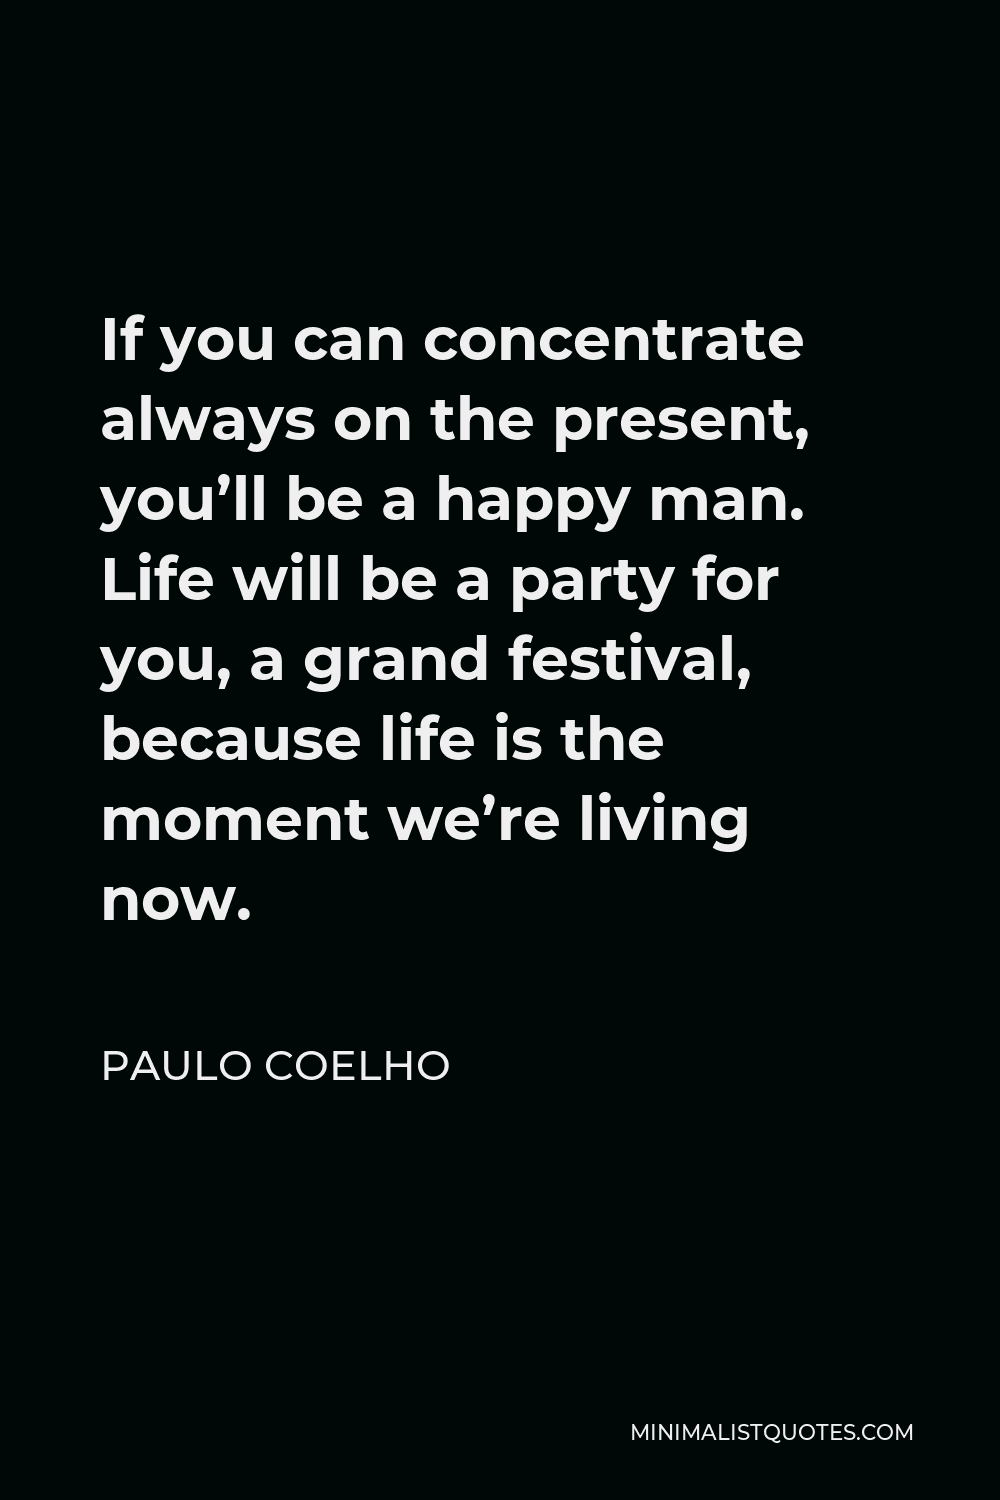 Paulo Coelho Quote - If you can concentrate always on the present, you’ll be a happy man. Life will be a party for you, a grand festival, because life is the moment we’re living now.